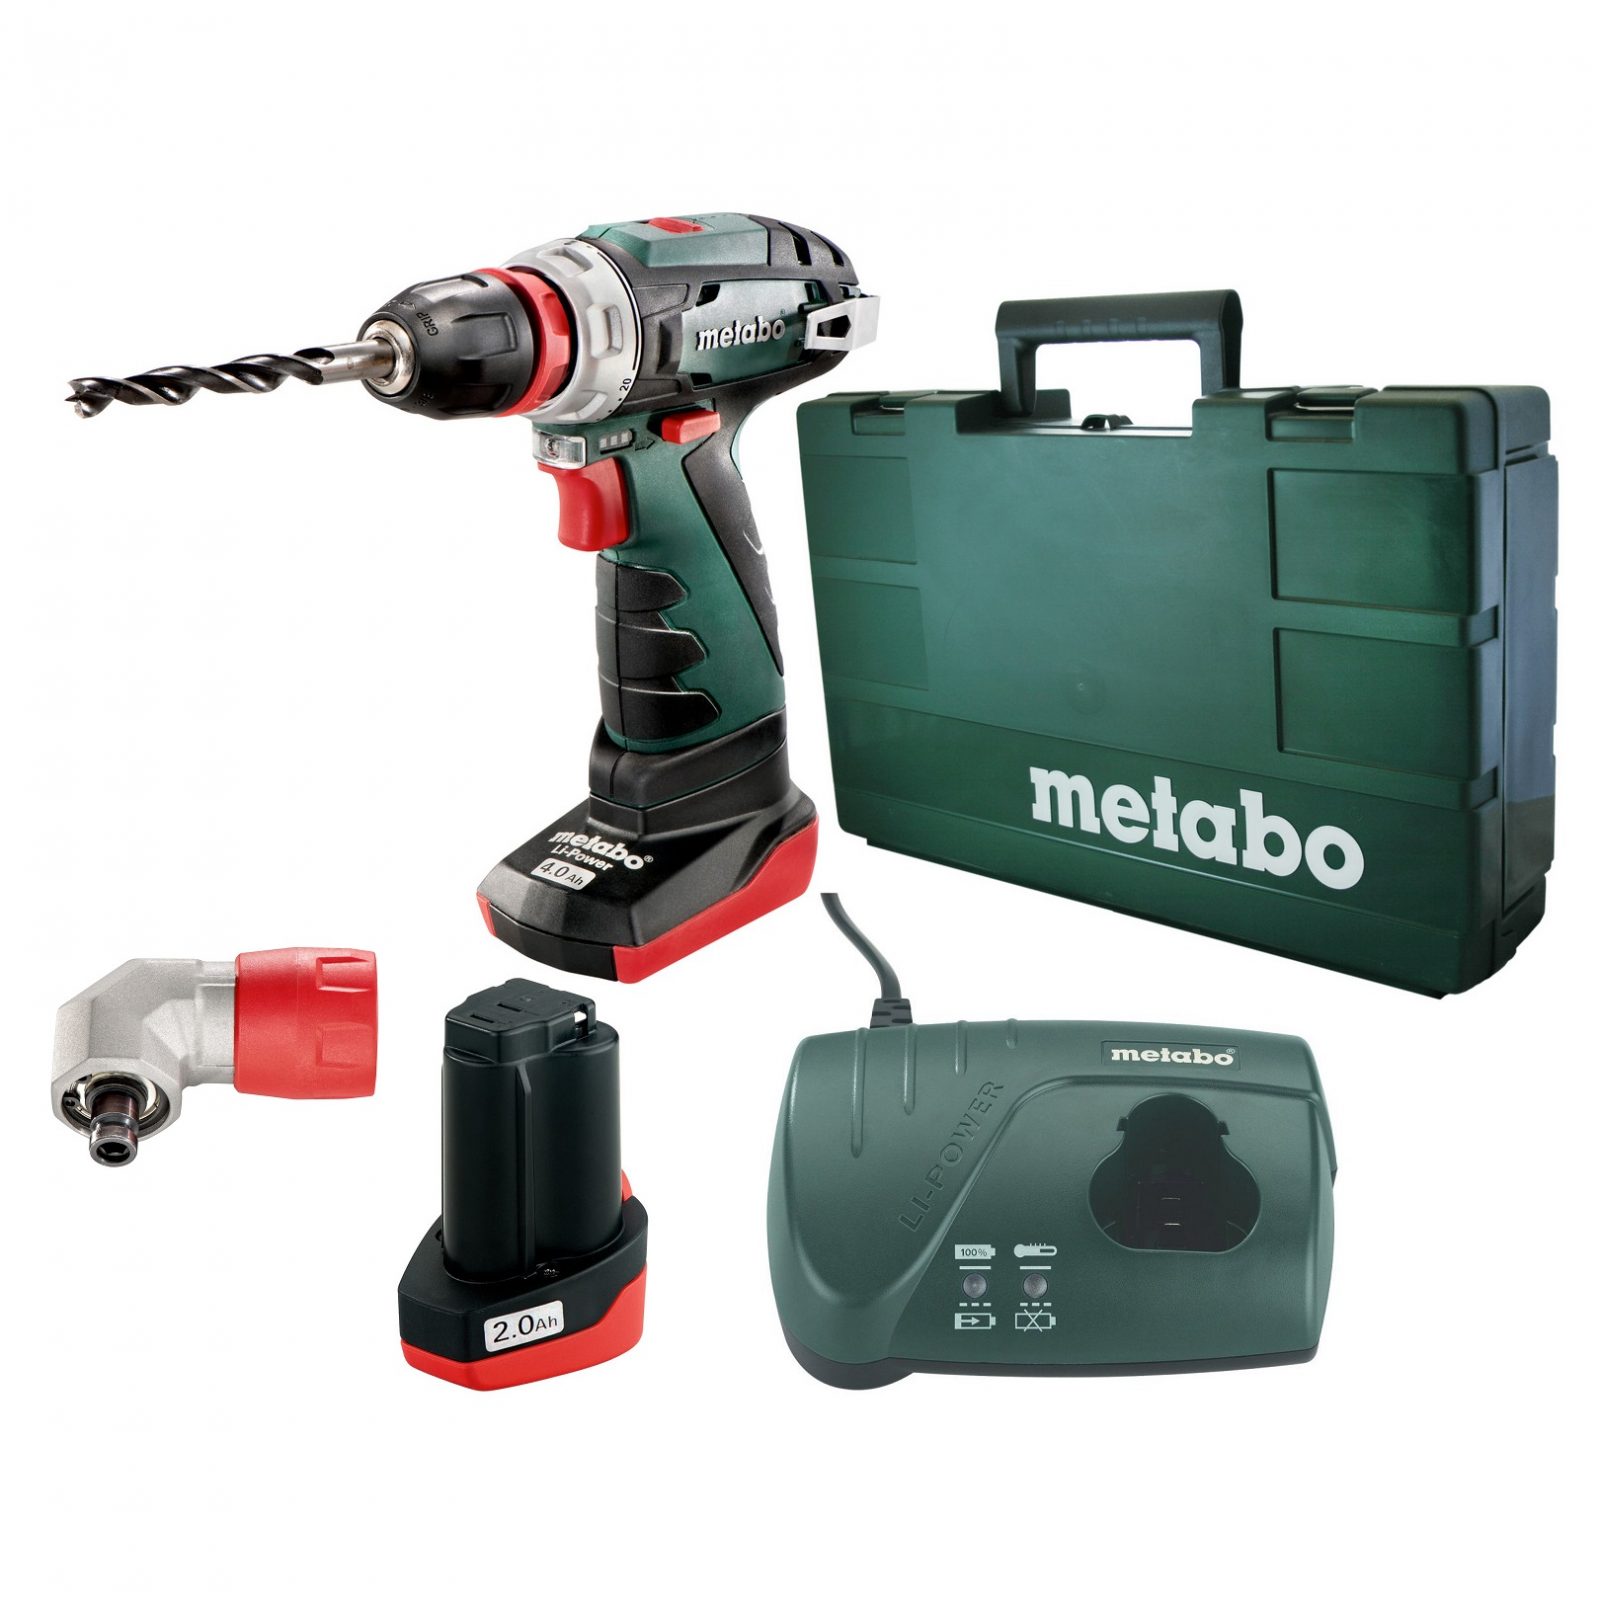 METABO 10.8V IMPACT DRIVERS FOR MAC DOWNLOAD